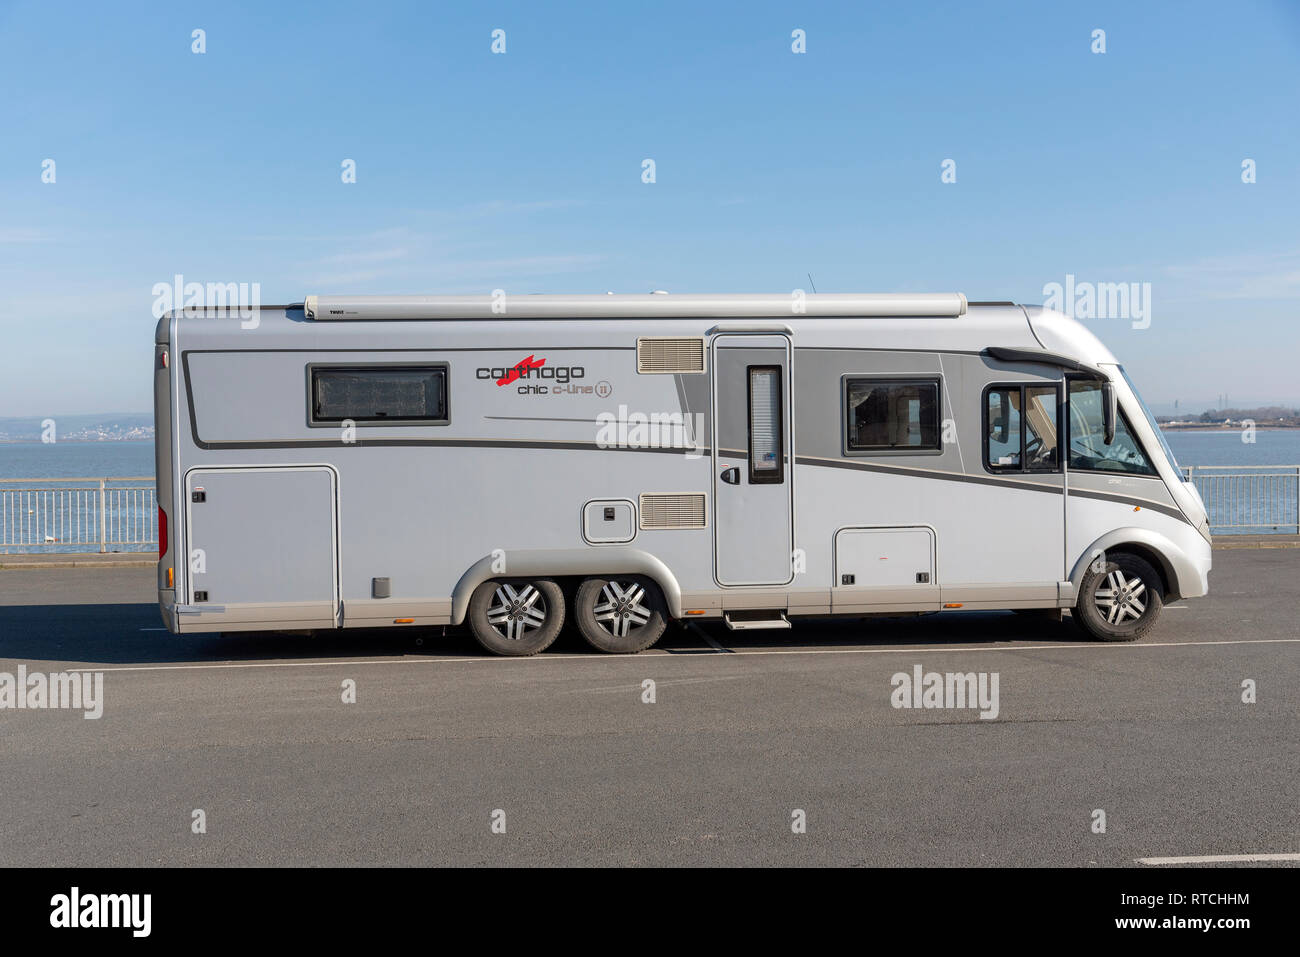 Appledore, North devon, England, UK. February 2019. A large motorhome standing on the waterfront of this coastal town. Stock Photo